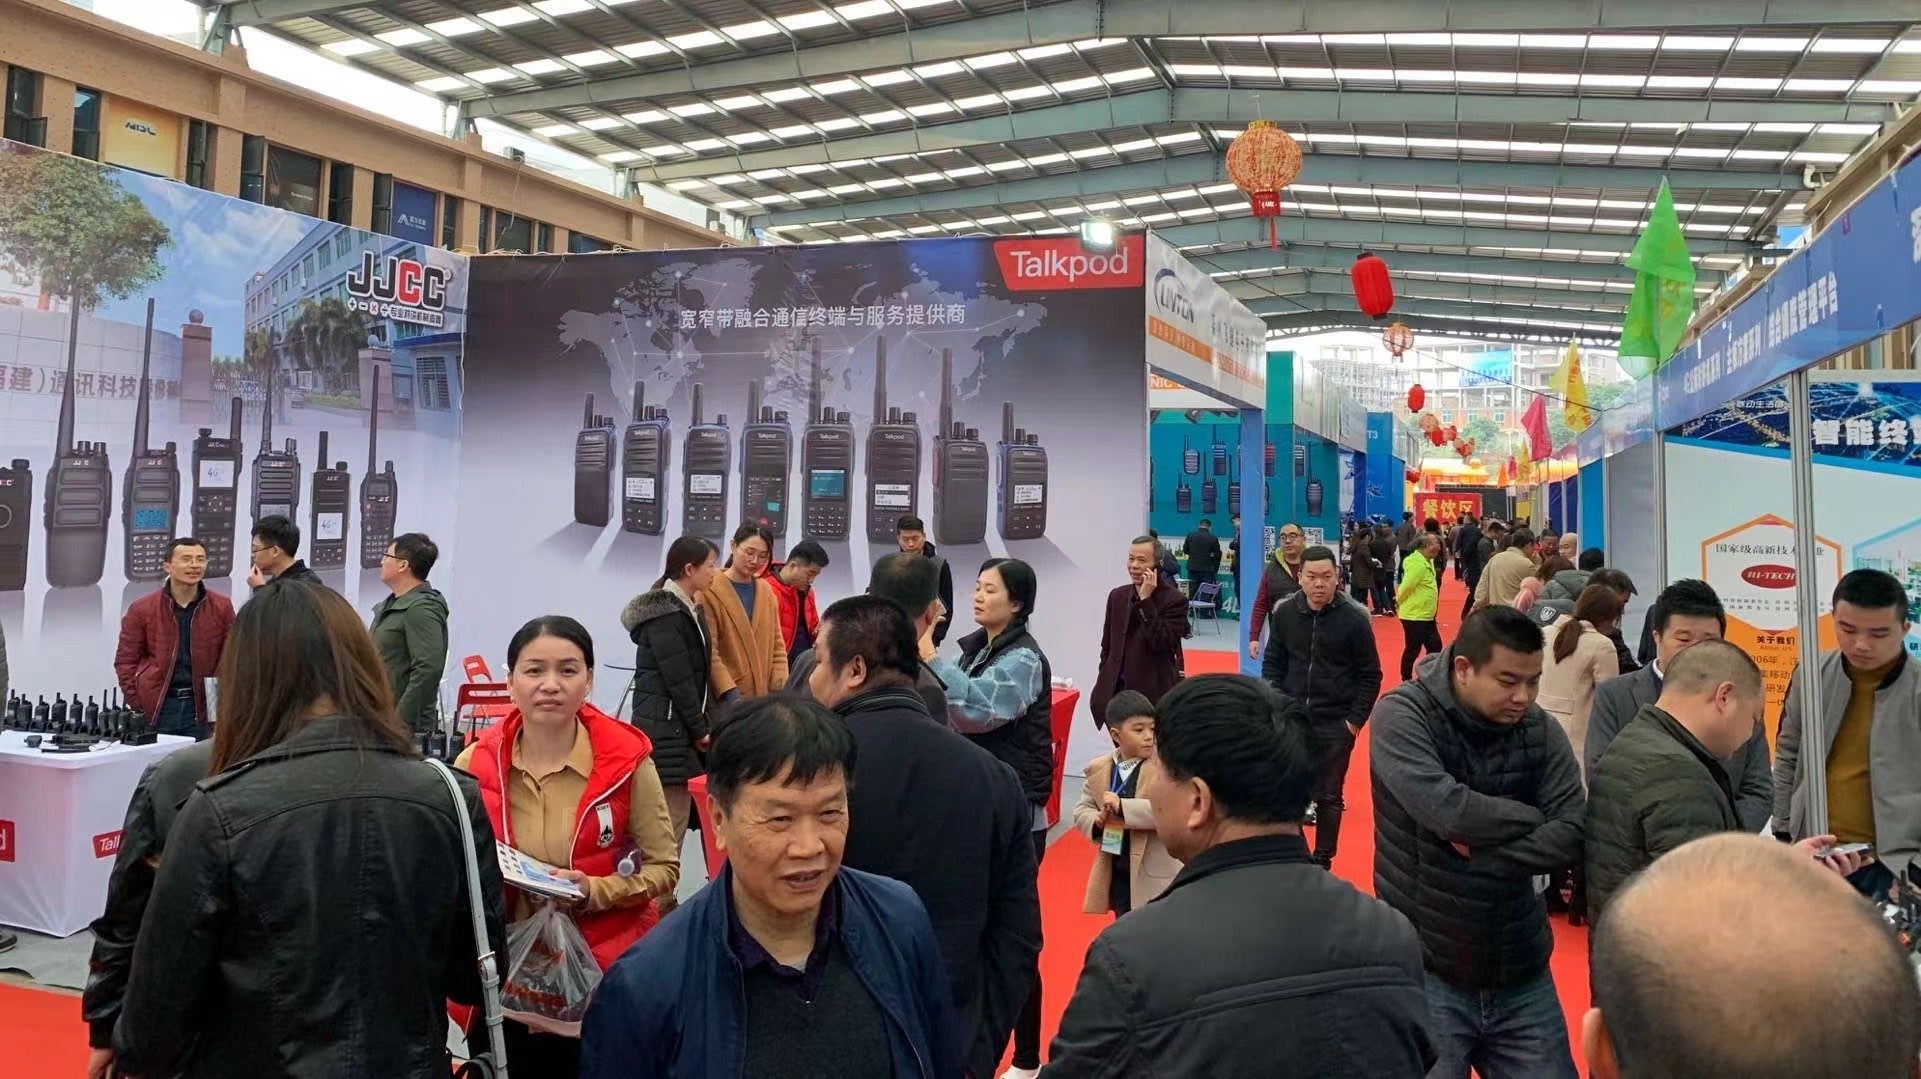 Talkpod Shines at Quanzhou Two-Way Radio Industry 2019 New Year Exhibition!